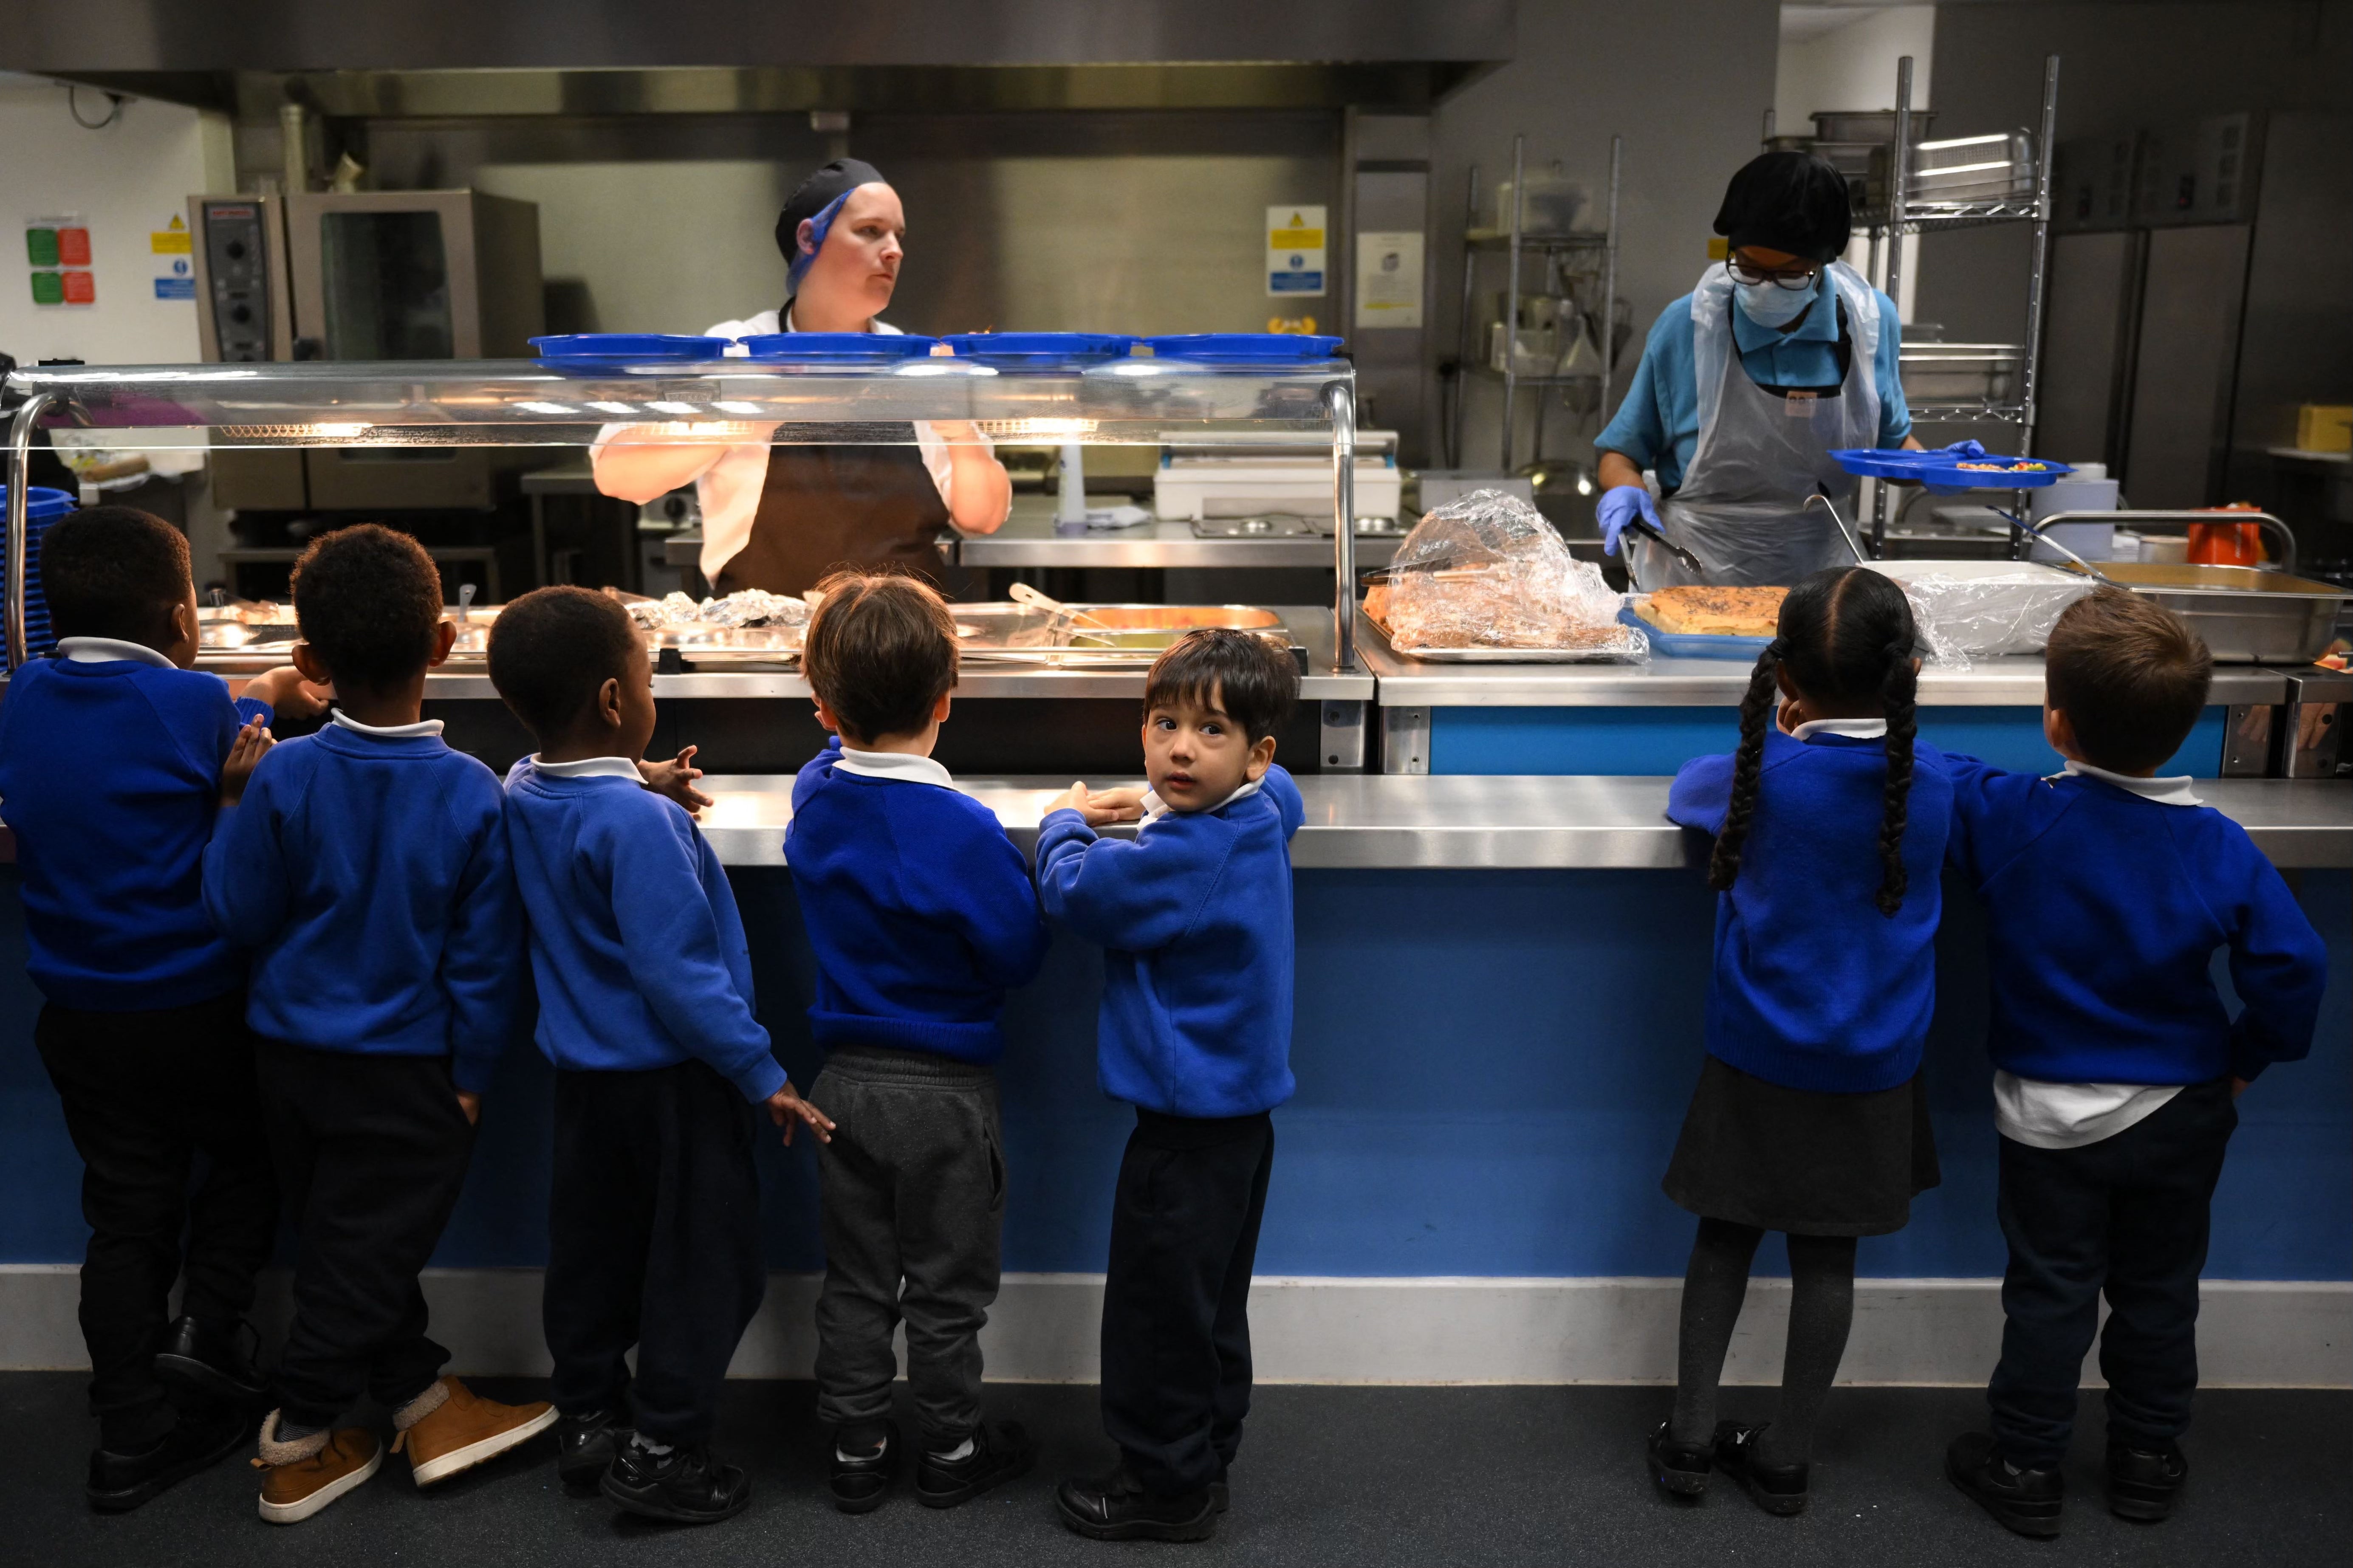 Children must still be provided with free school meals, charities have said